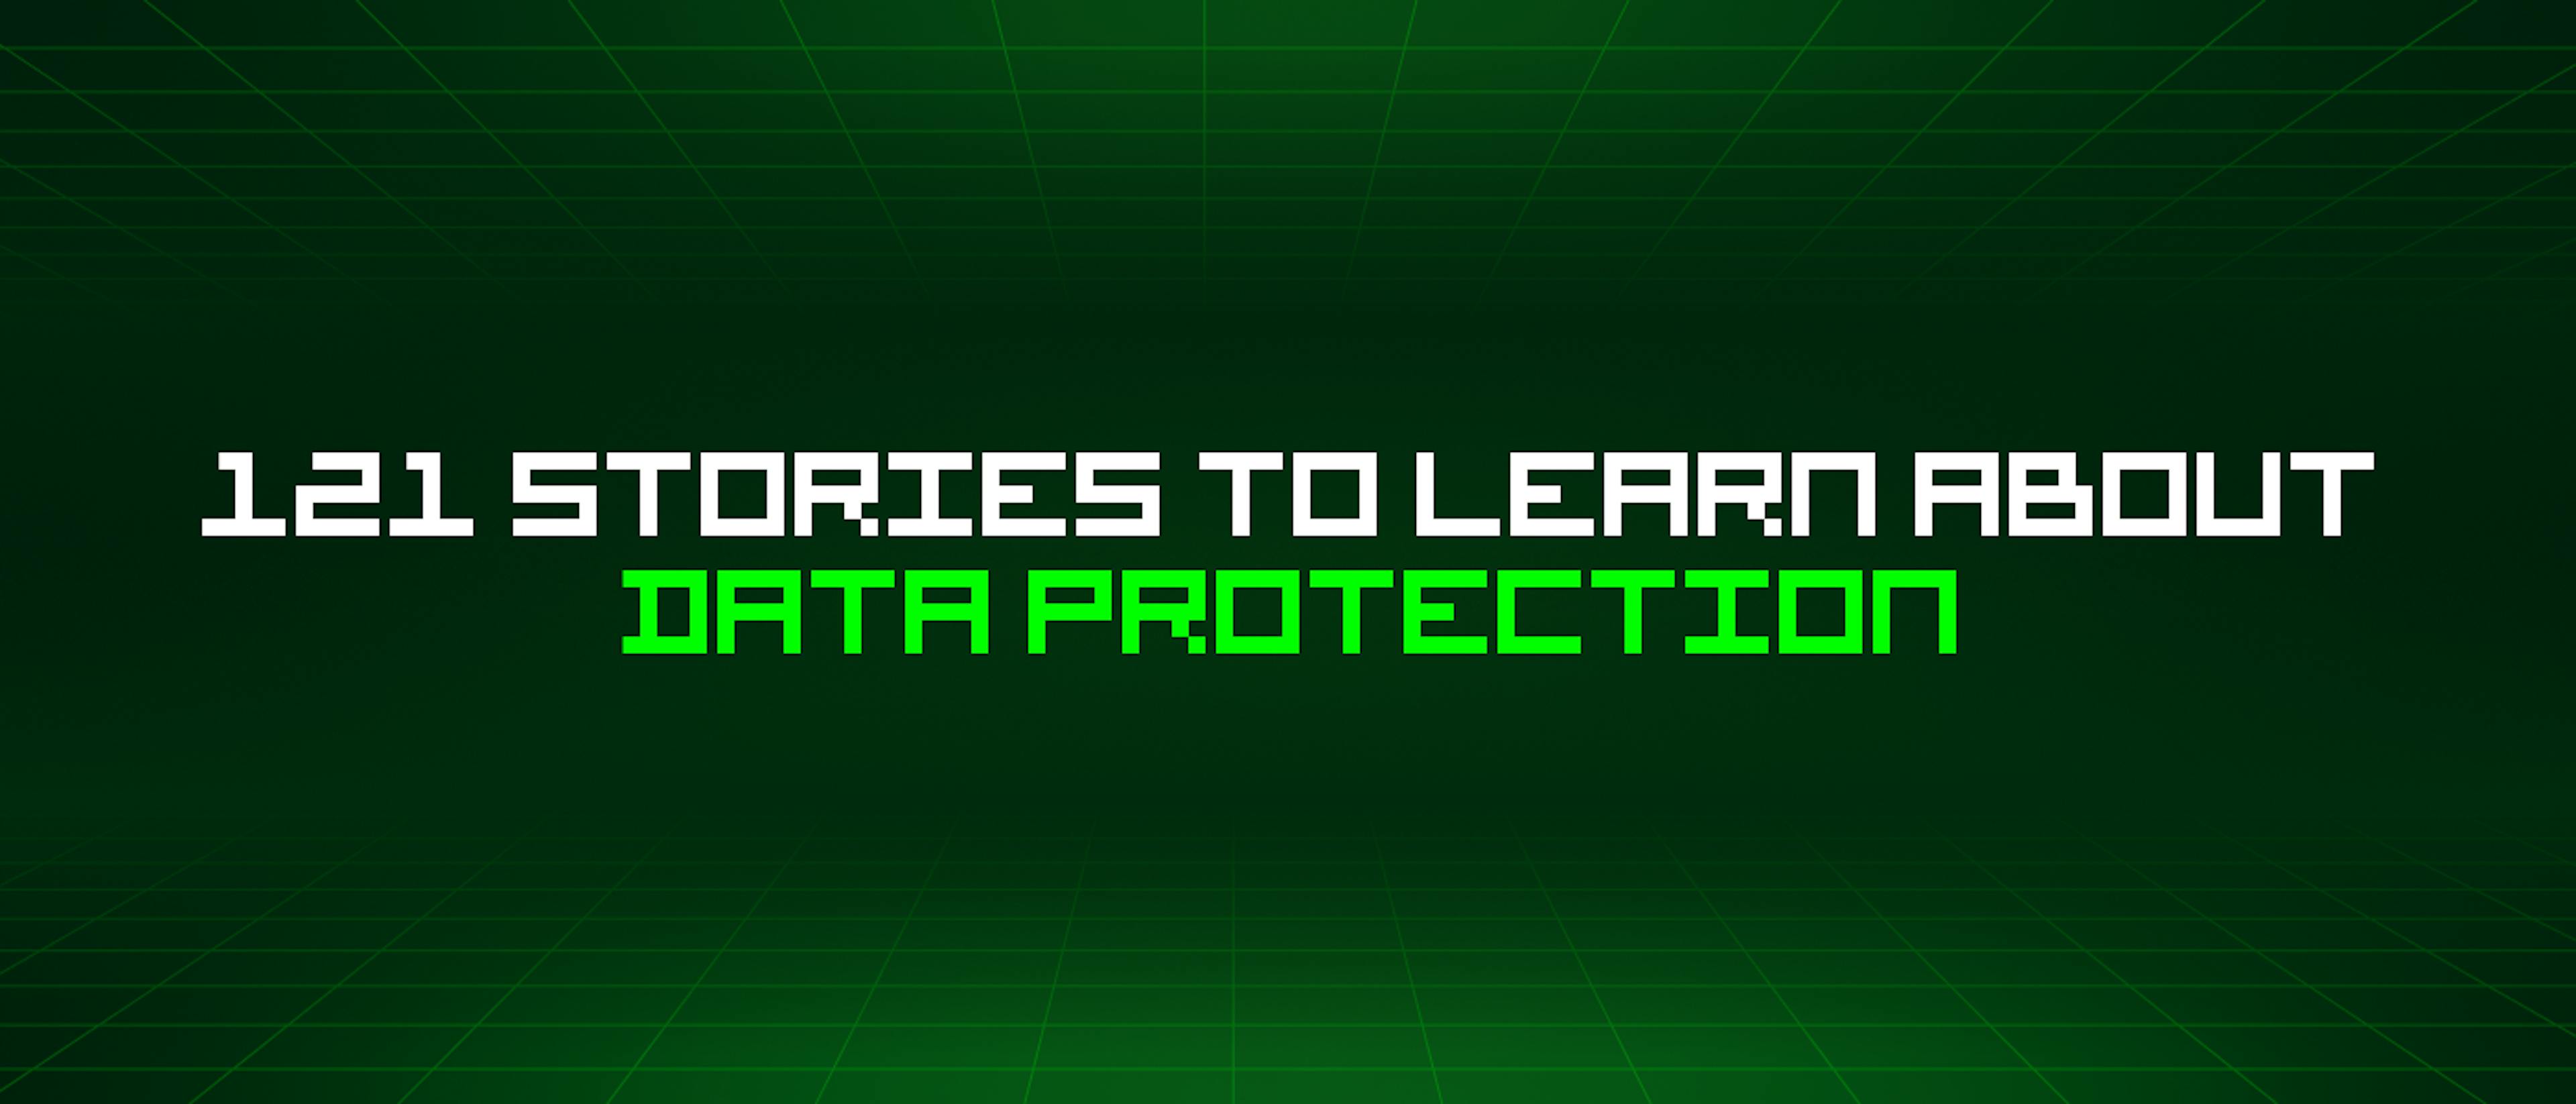 featured image - 121 Stories To Learn About Data Protection